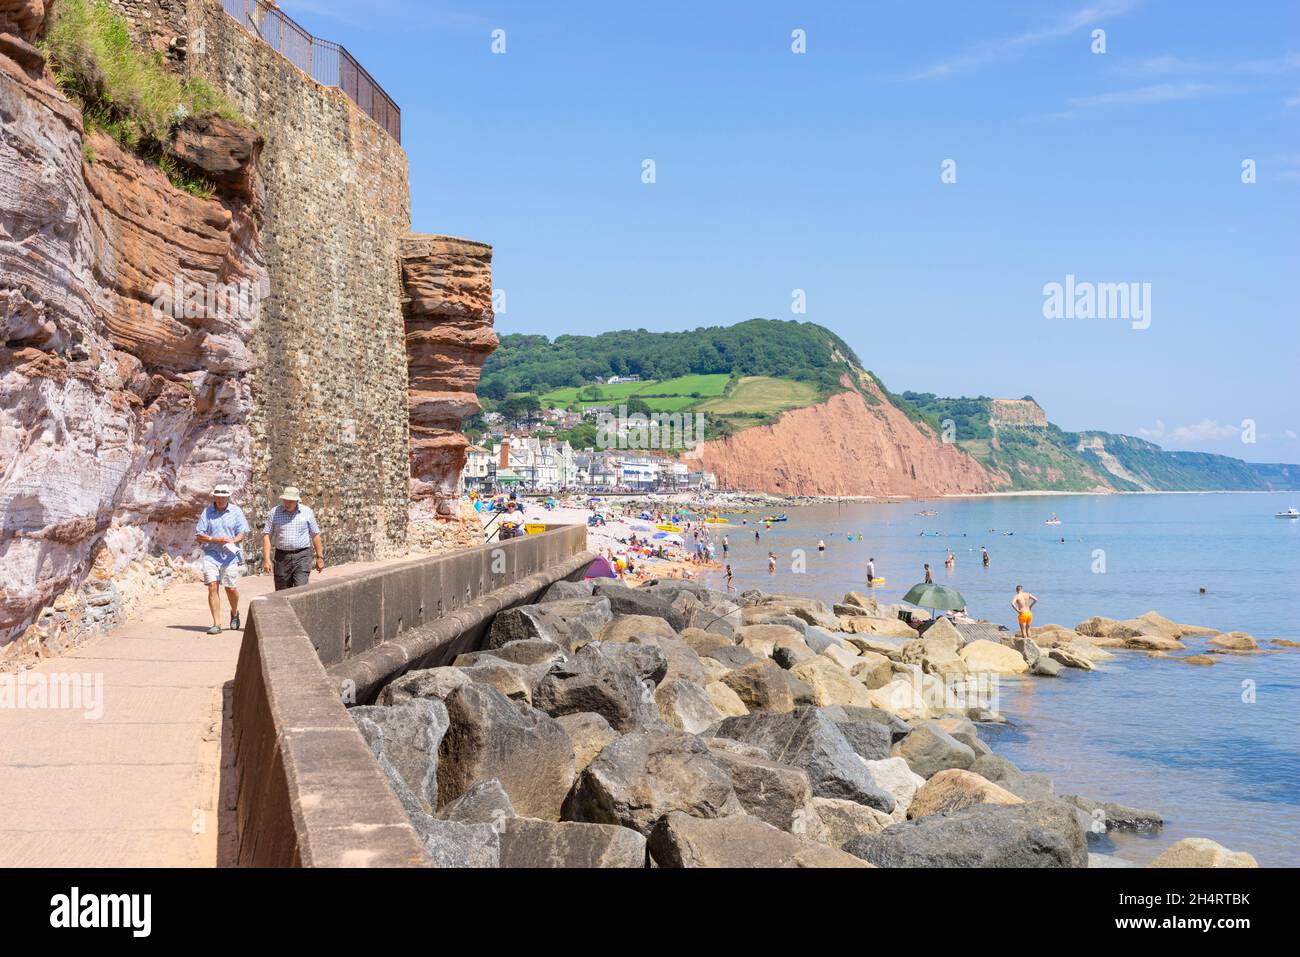 Sidmouth Devon People walking on the Esplanade around the cliff part of the S W coast path Sidmouth Town Sidmouth Devon England UK GB Europe Stock Photo